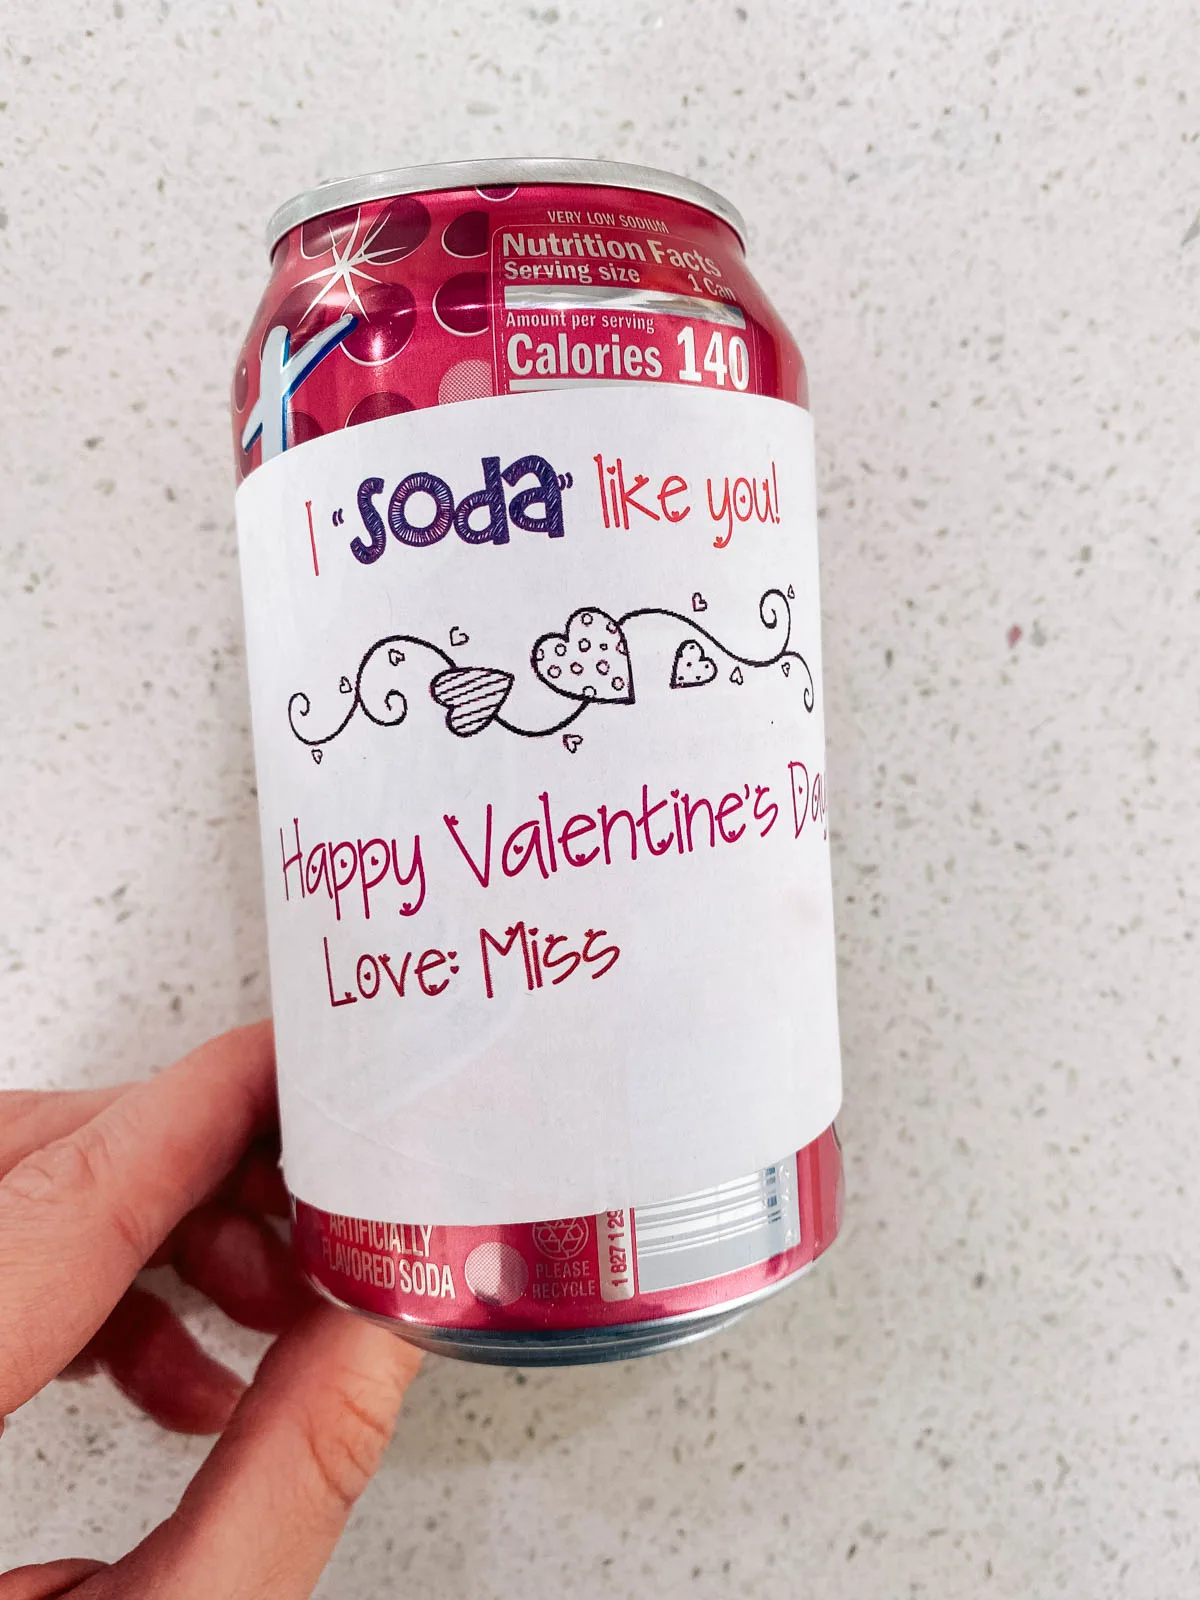 Pink can of soda with a Valentine's day message on a piece of paper wrapped around it.